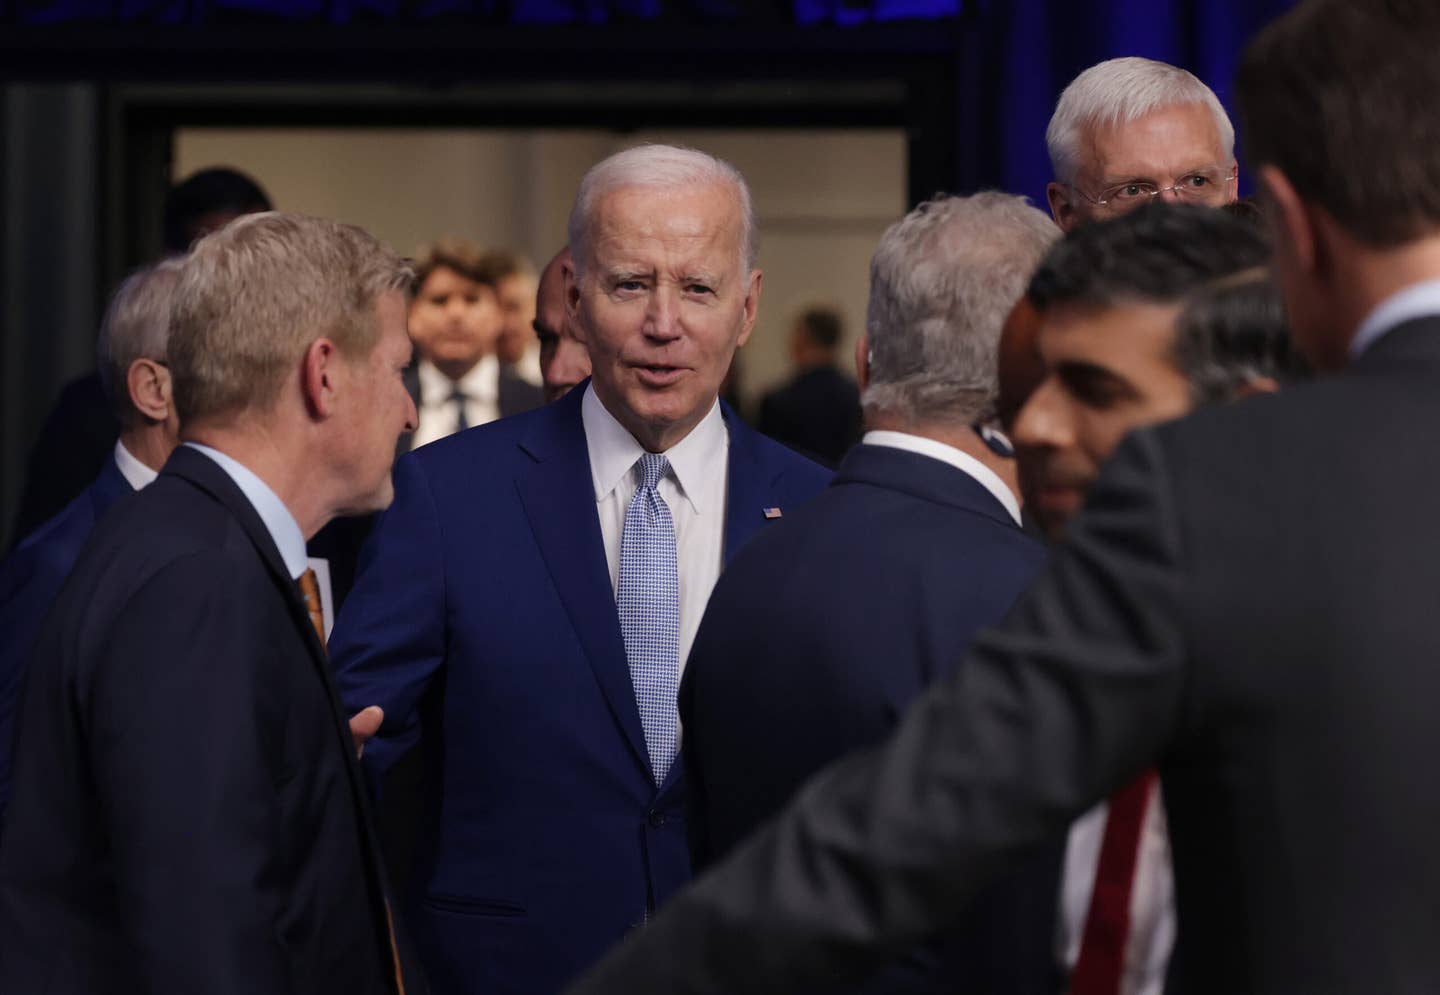 U.S. President Joe Biden attends the opening high-level session of the 2023 NATO Summit on July 11, 2023 in Vilnius, Lithuania. <em>Photo by Sean Gallup/Getty Images</em>